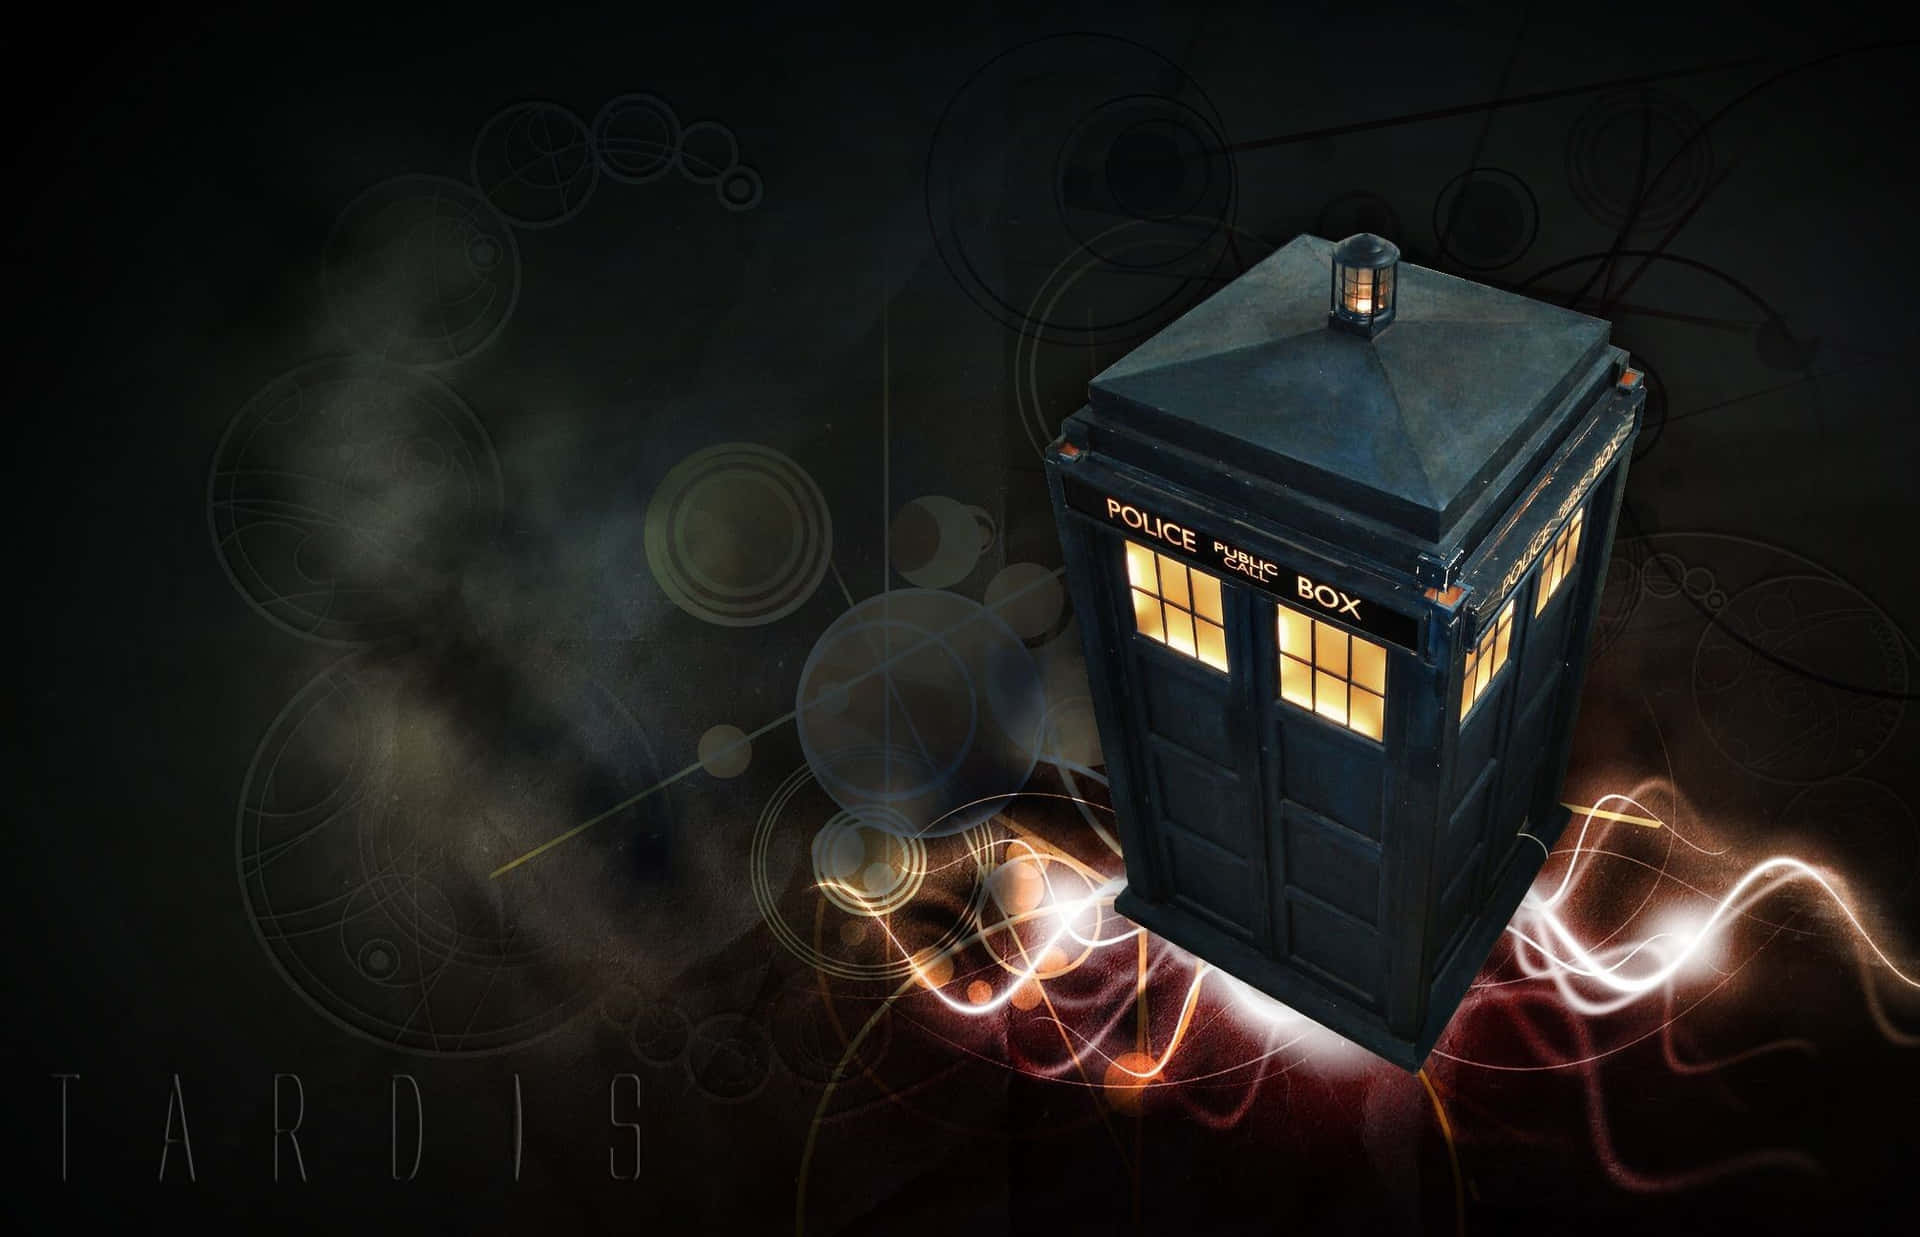 Time and Space travel has never been more fun with the Tardis Wallpaper